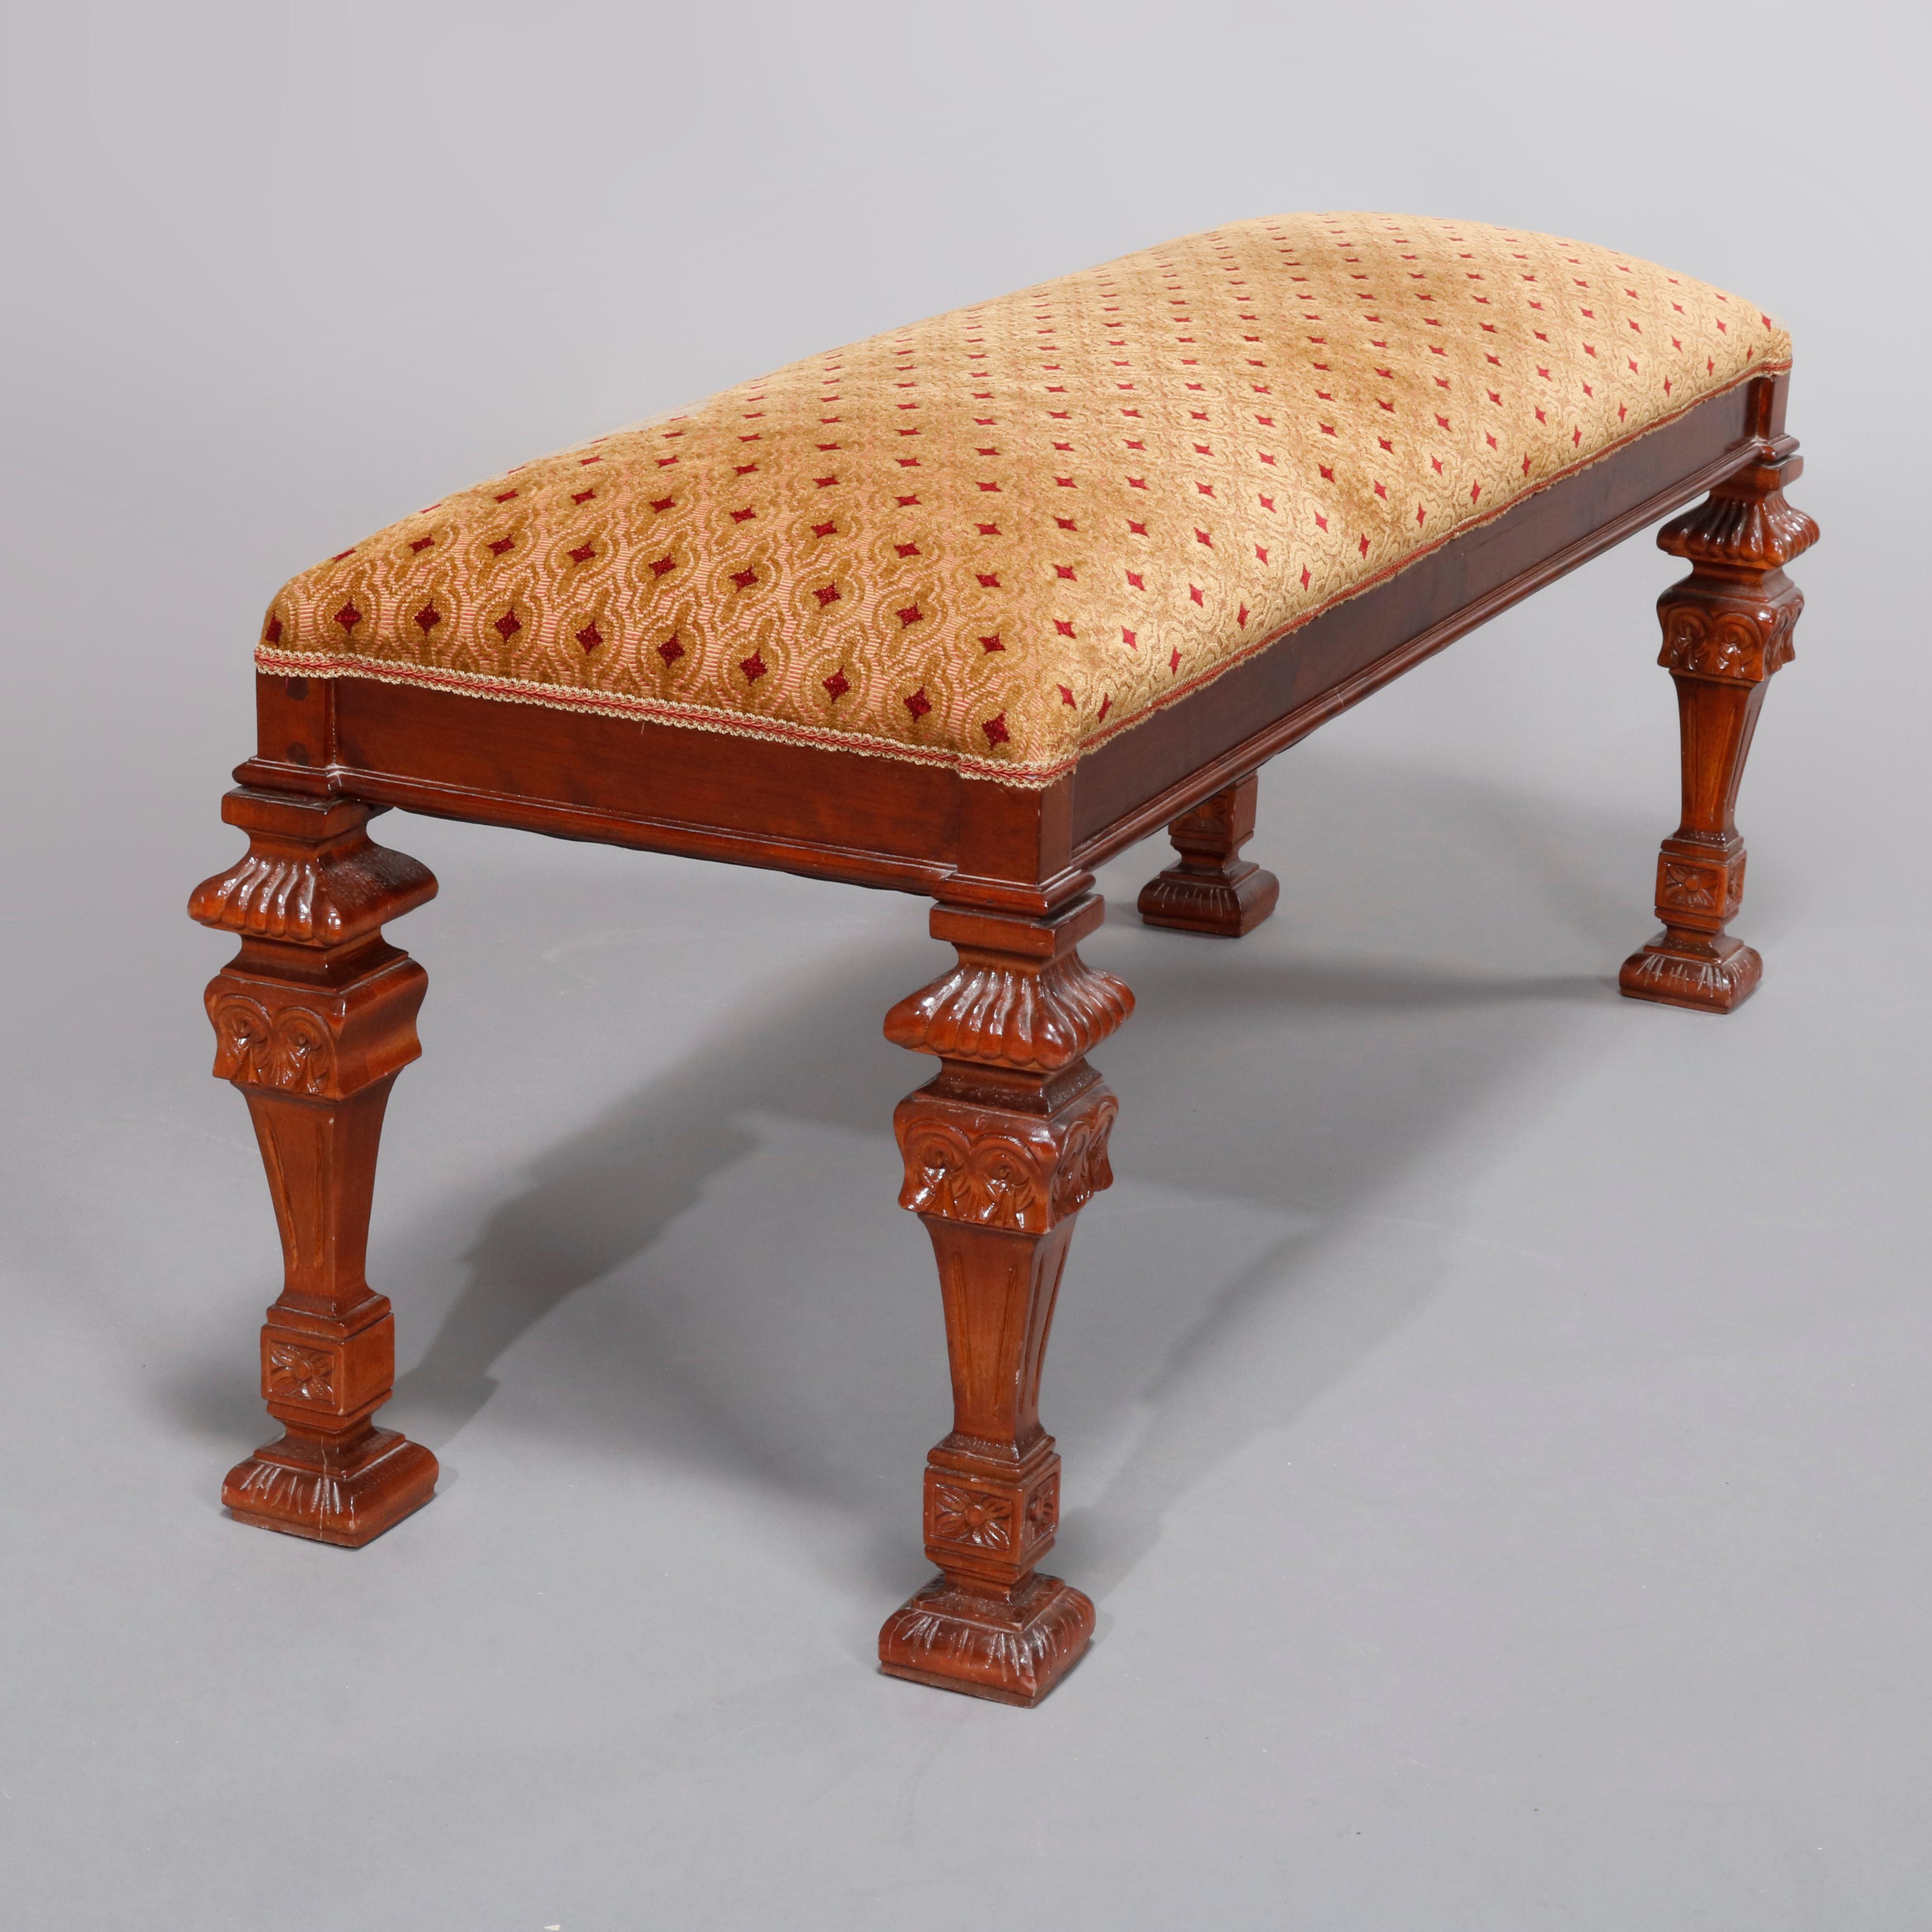 Upholstery Vintage Continental Carved Mahogany Upholstered Long Bench, 20th Century